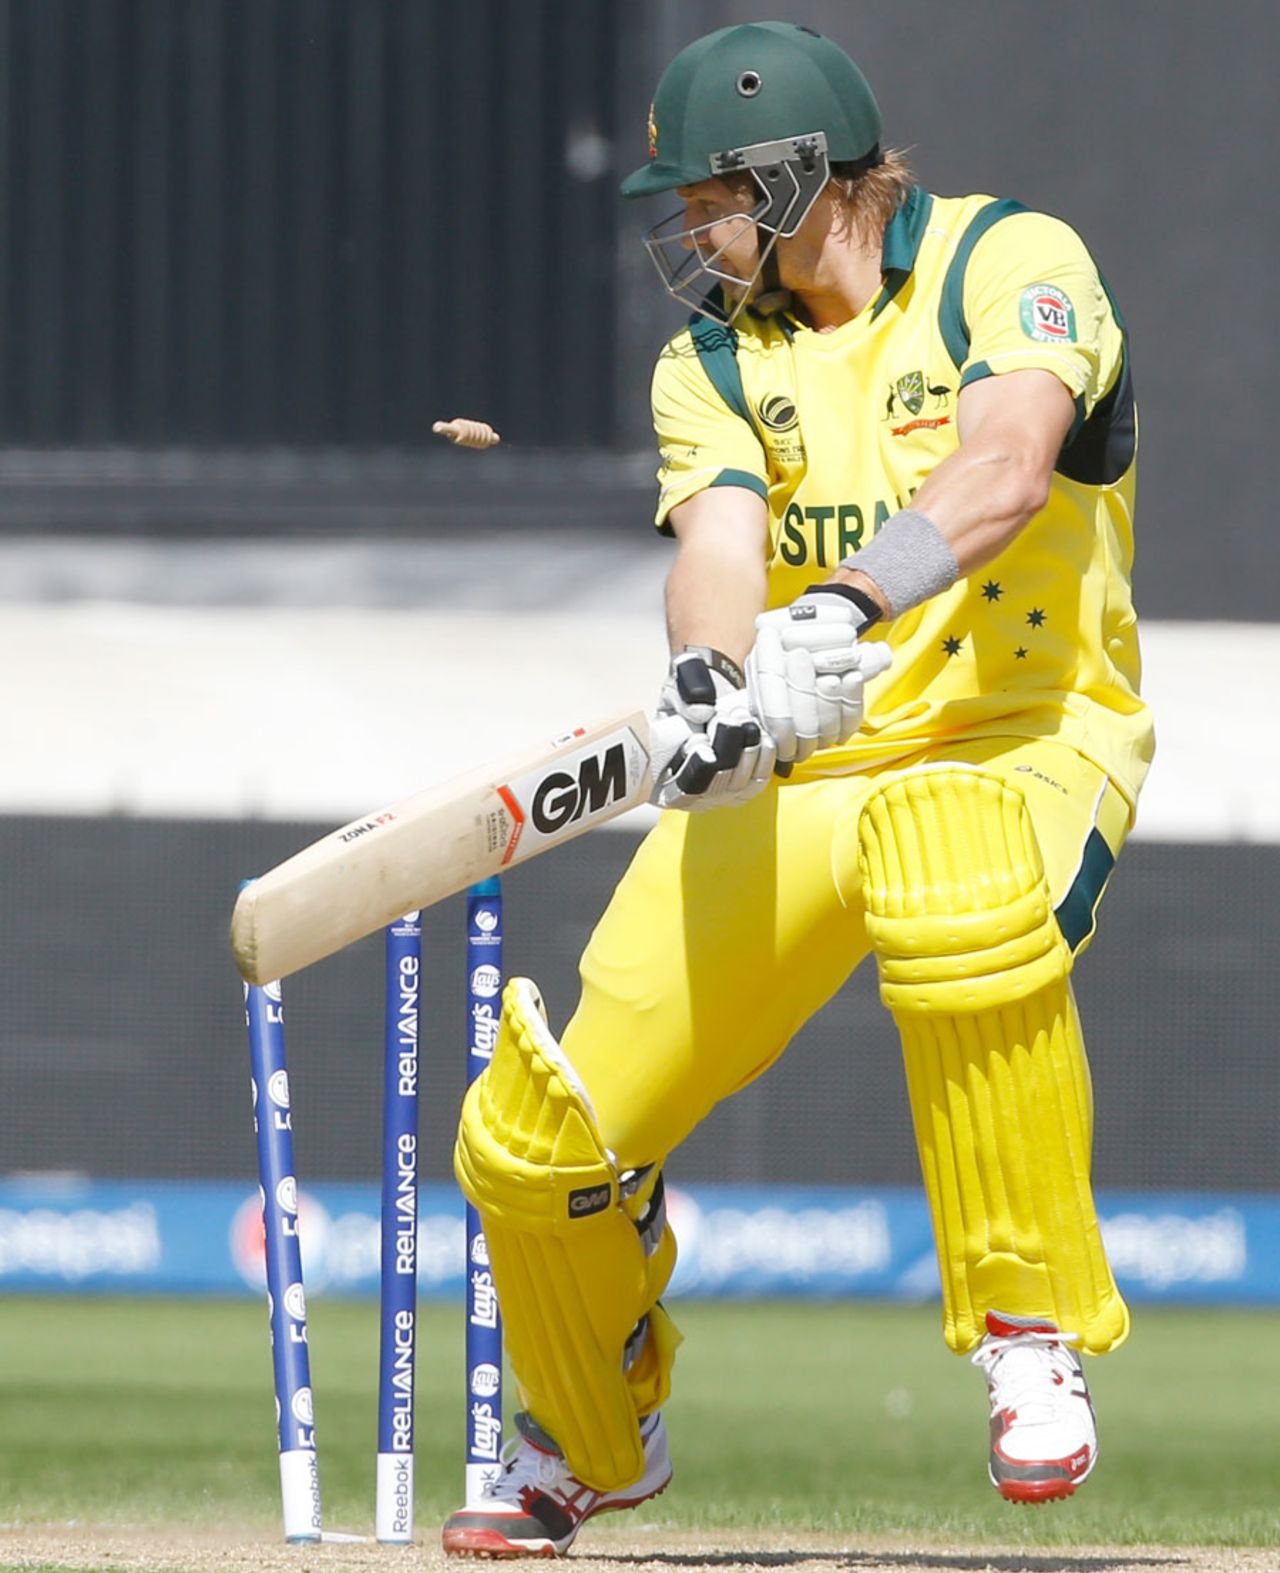 Shane Watson chops one on to his stumps, India v Australia, Champions Trophy warm-up, Cardiff, June 4, 2013